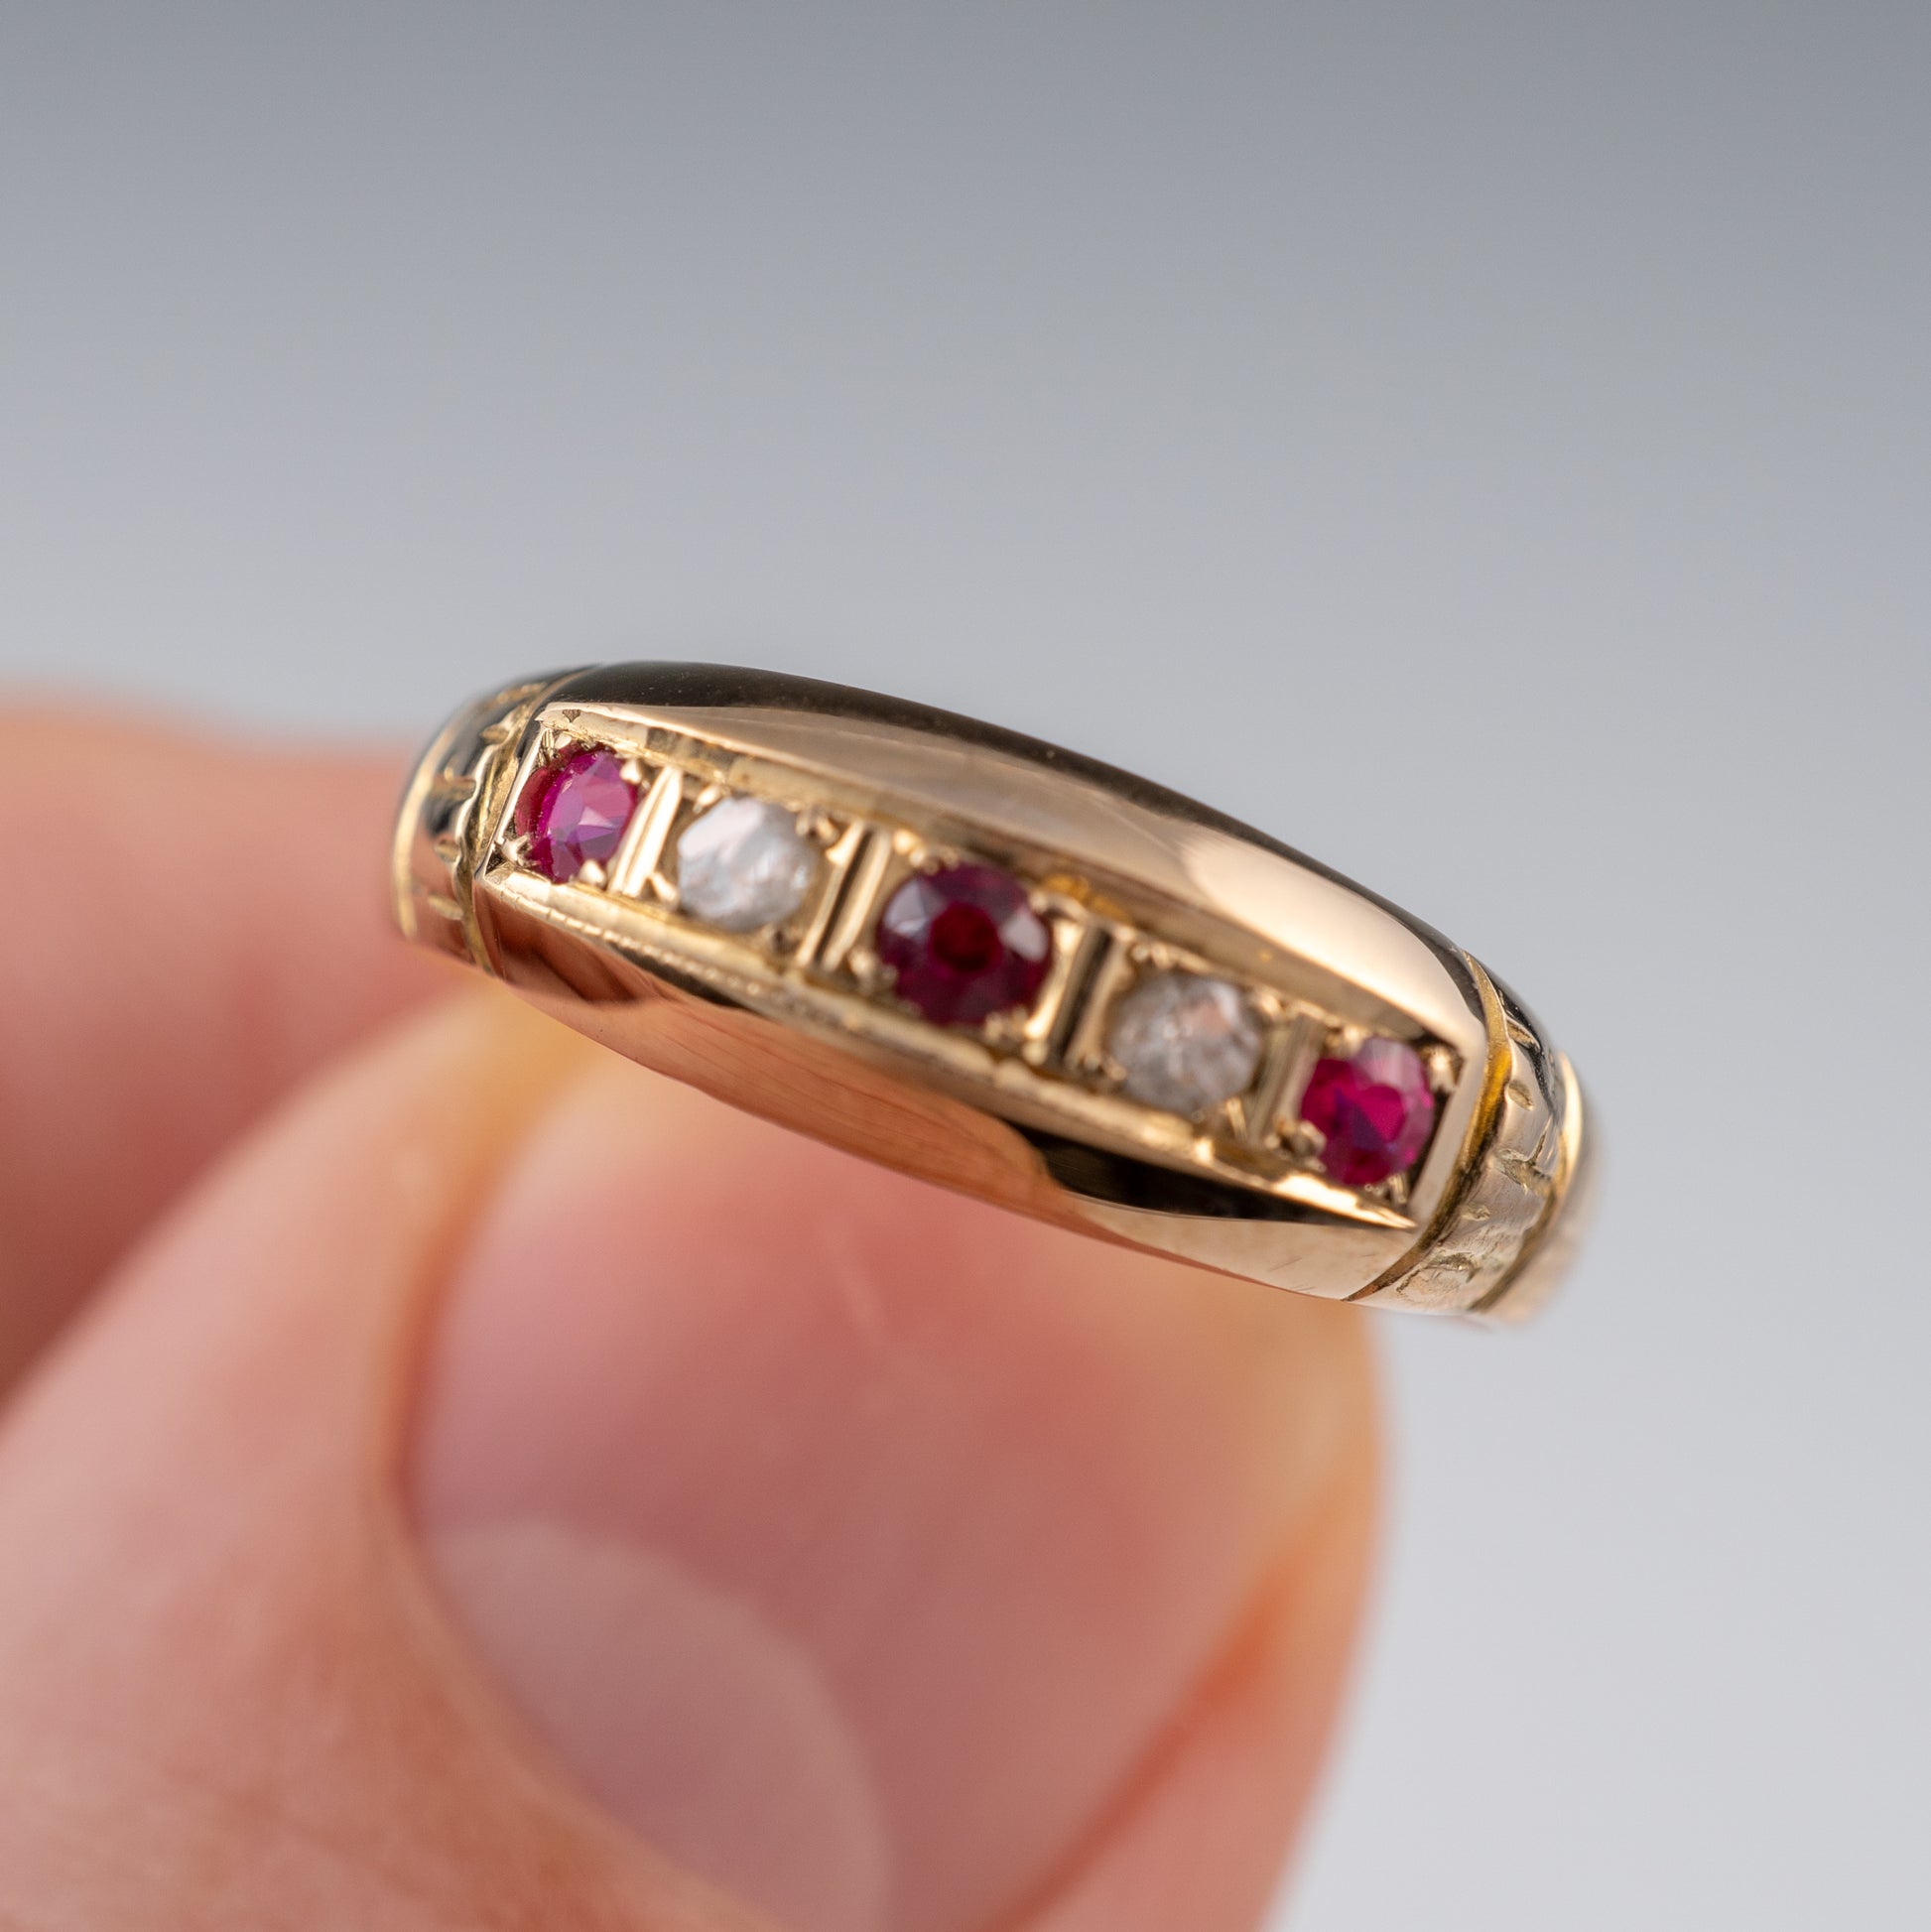 Antique 18ct Gold Ruby Diamond Gypsy Ring Chester 1918 - Hunters Fine Jewellery